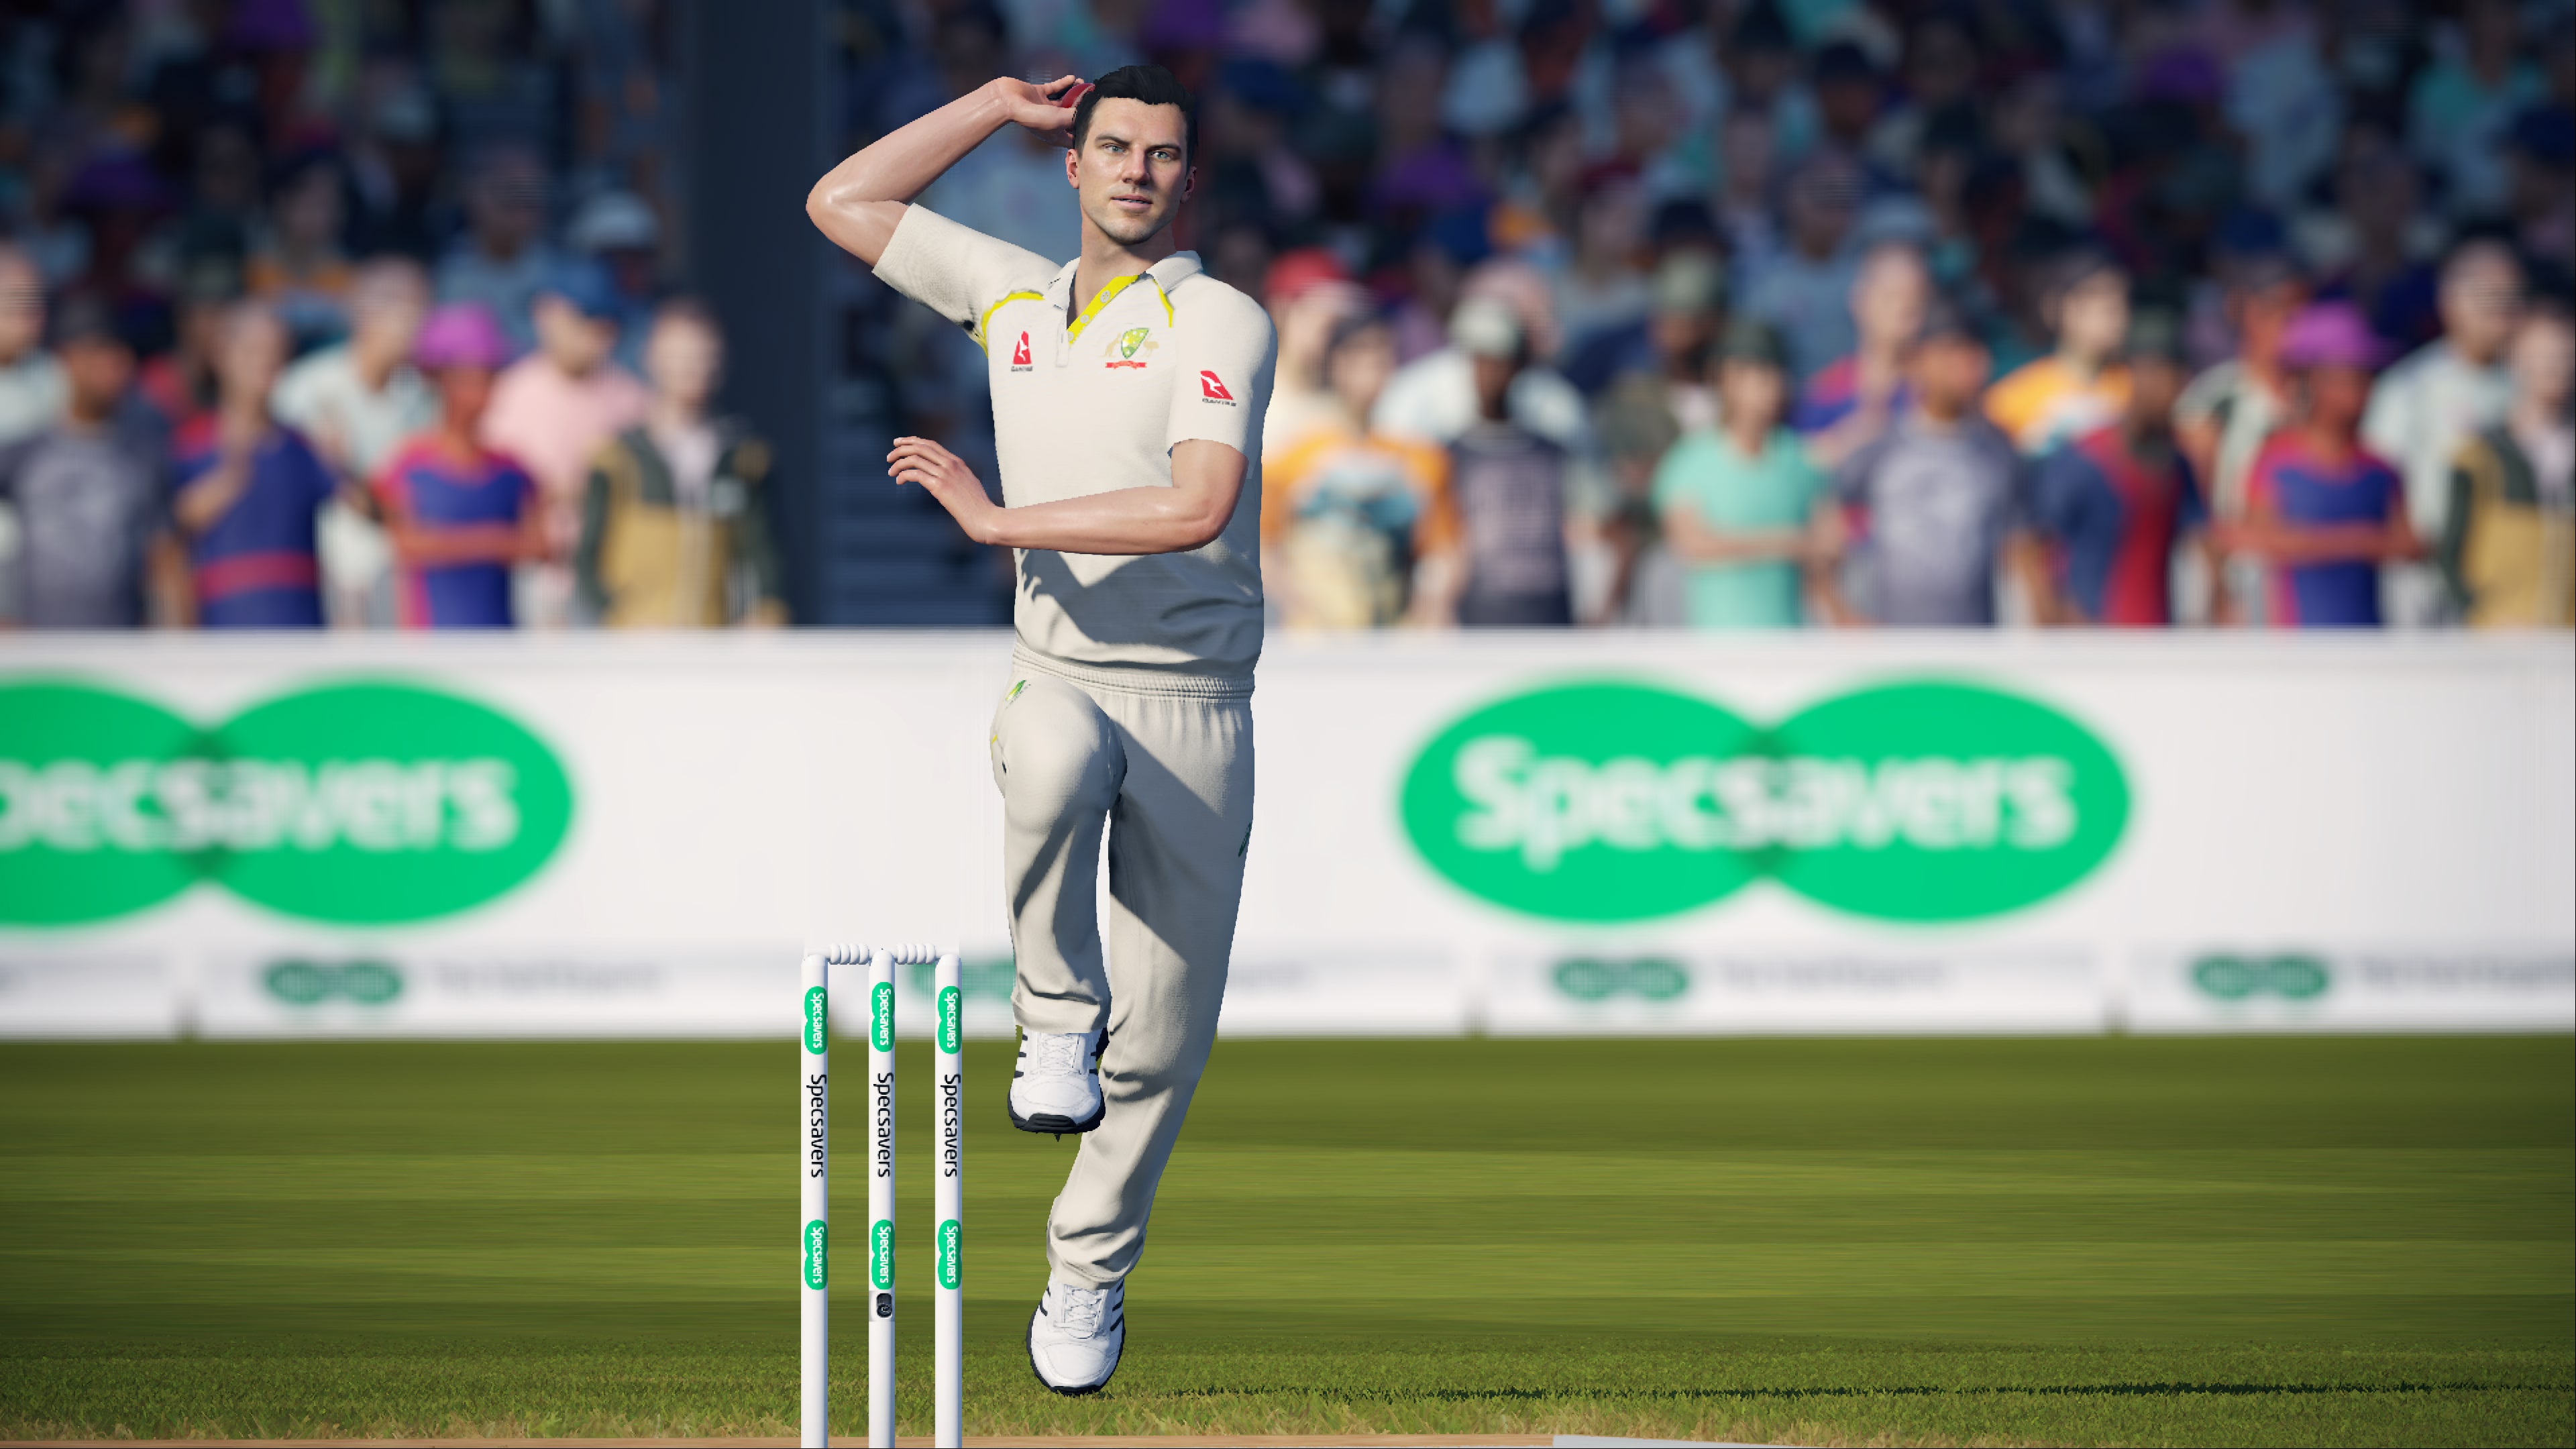 cricket vr game ps4